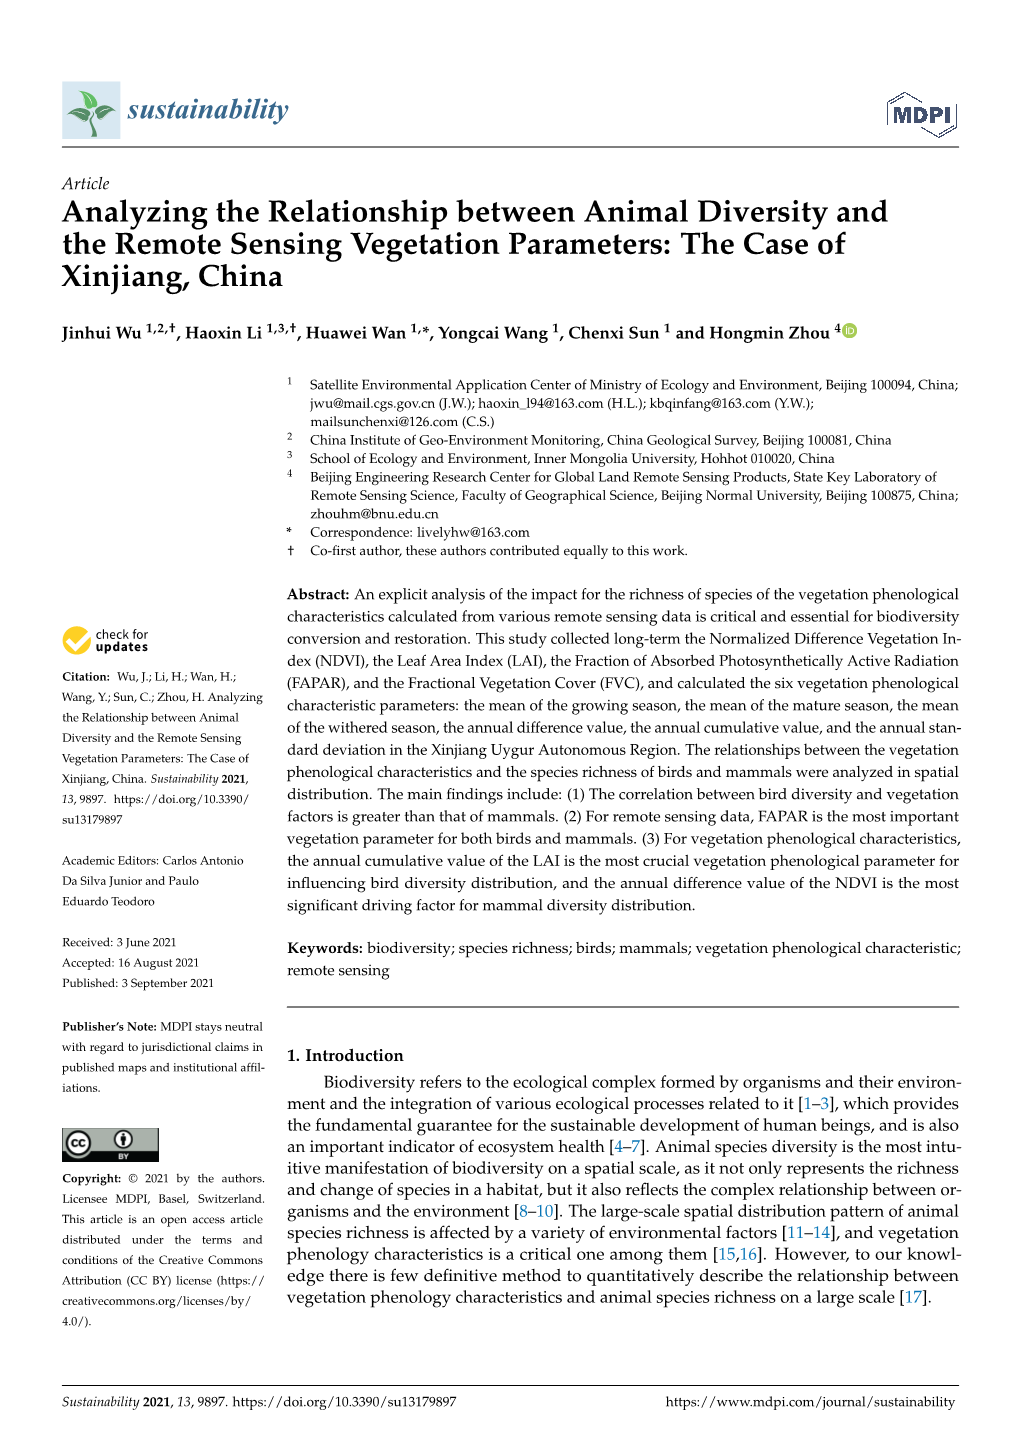 Analyzing the Relationship Between Animal Diversity and the Remote Sensing Vegetation Parameters: the Case of Xinjiang, China